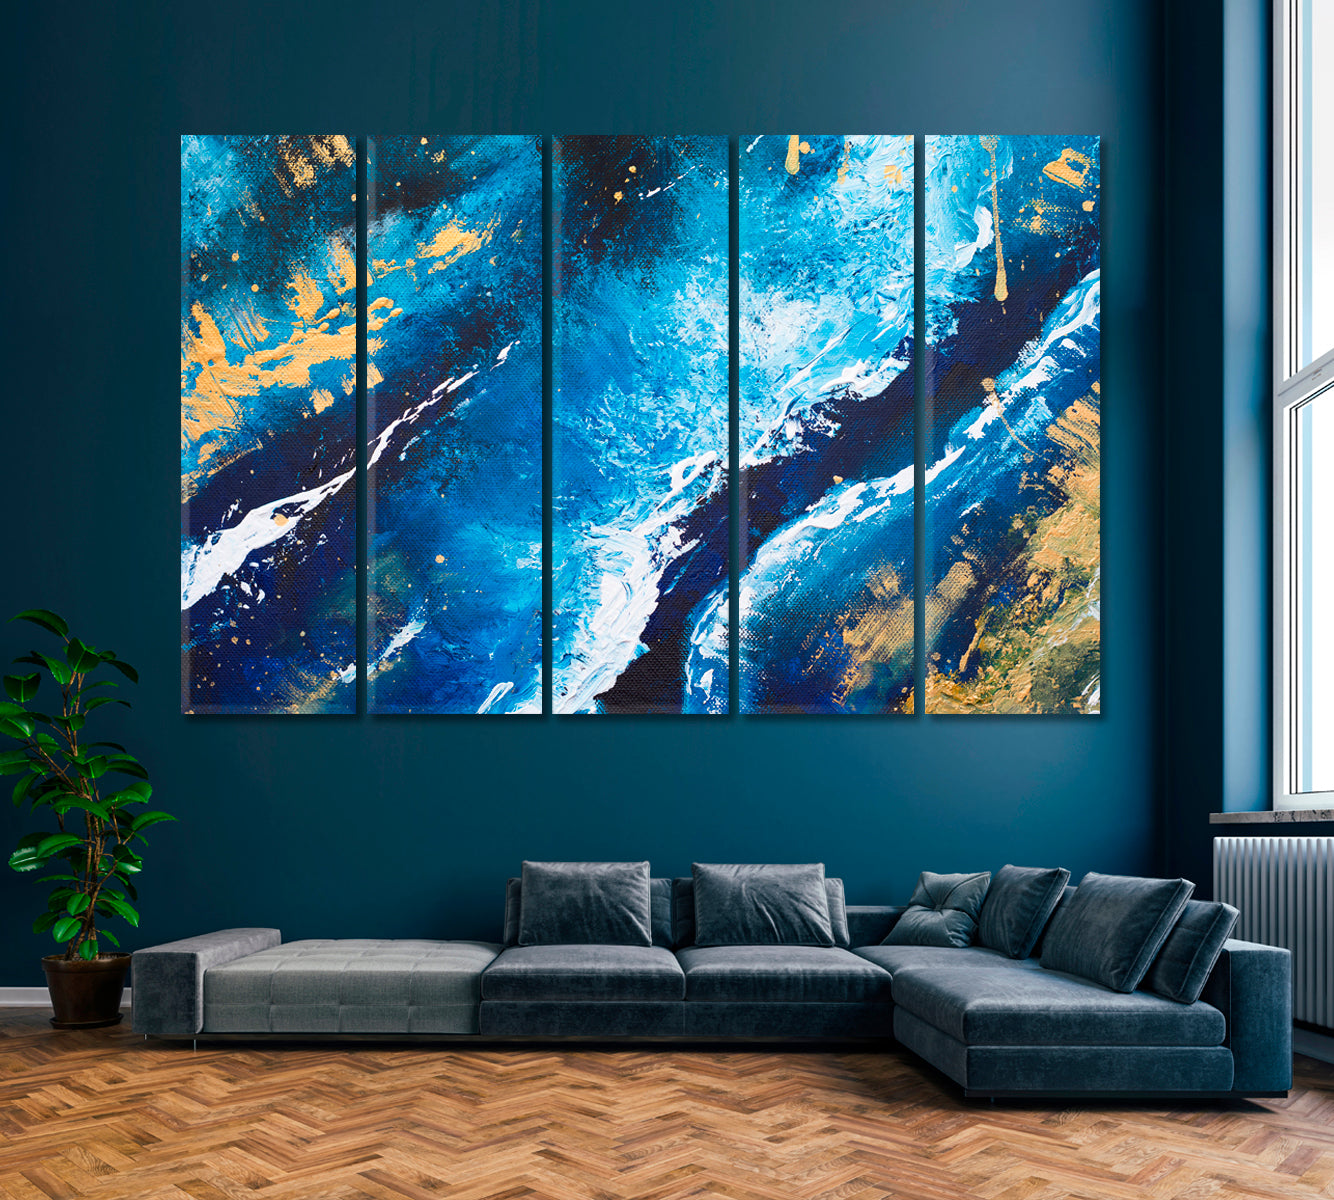 Blue Marbling Acrylic Design Canvas Print ArtLexy 5 Panels 36"x24" inches 